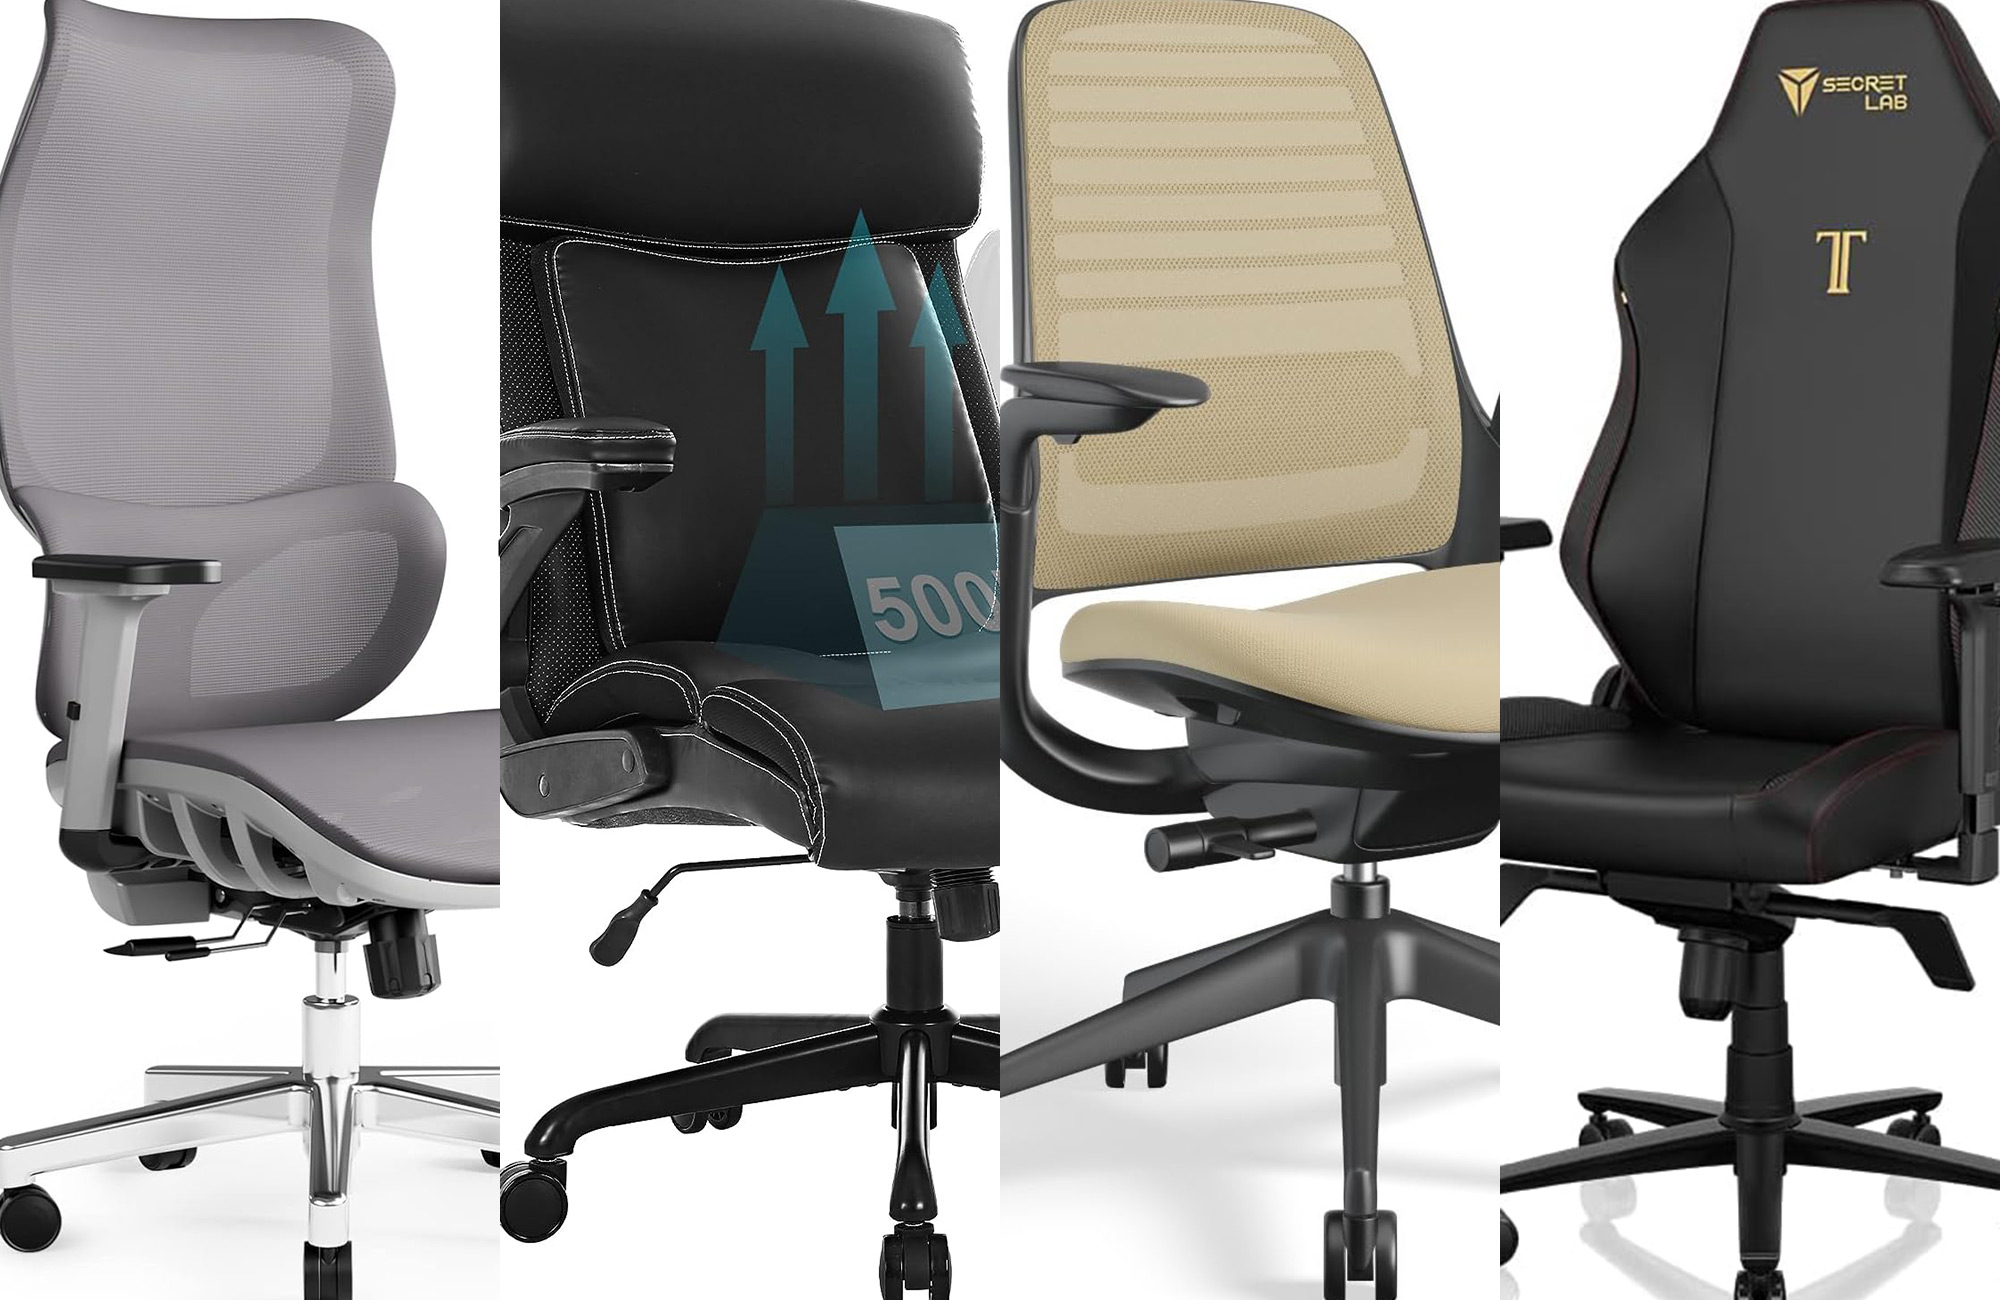 Convert a Car Seat Into the Coolest Office Chair Ever